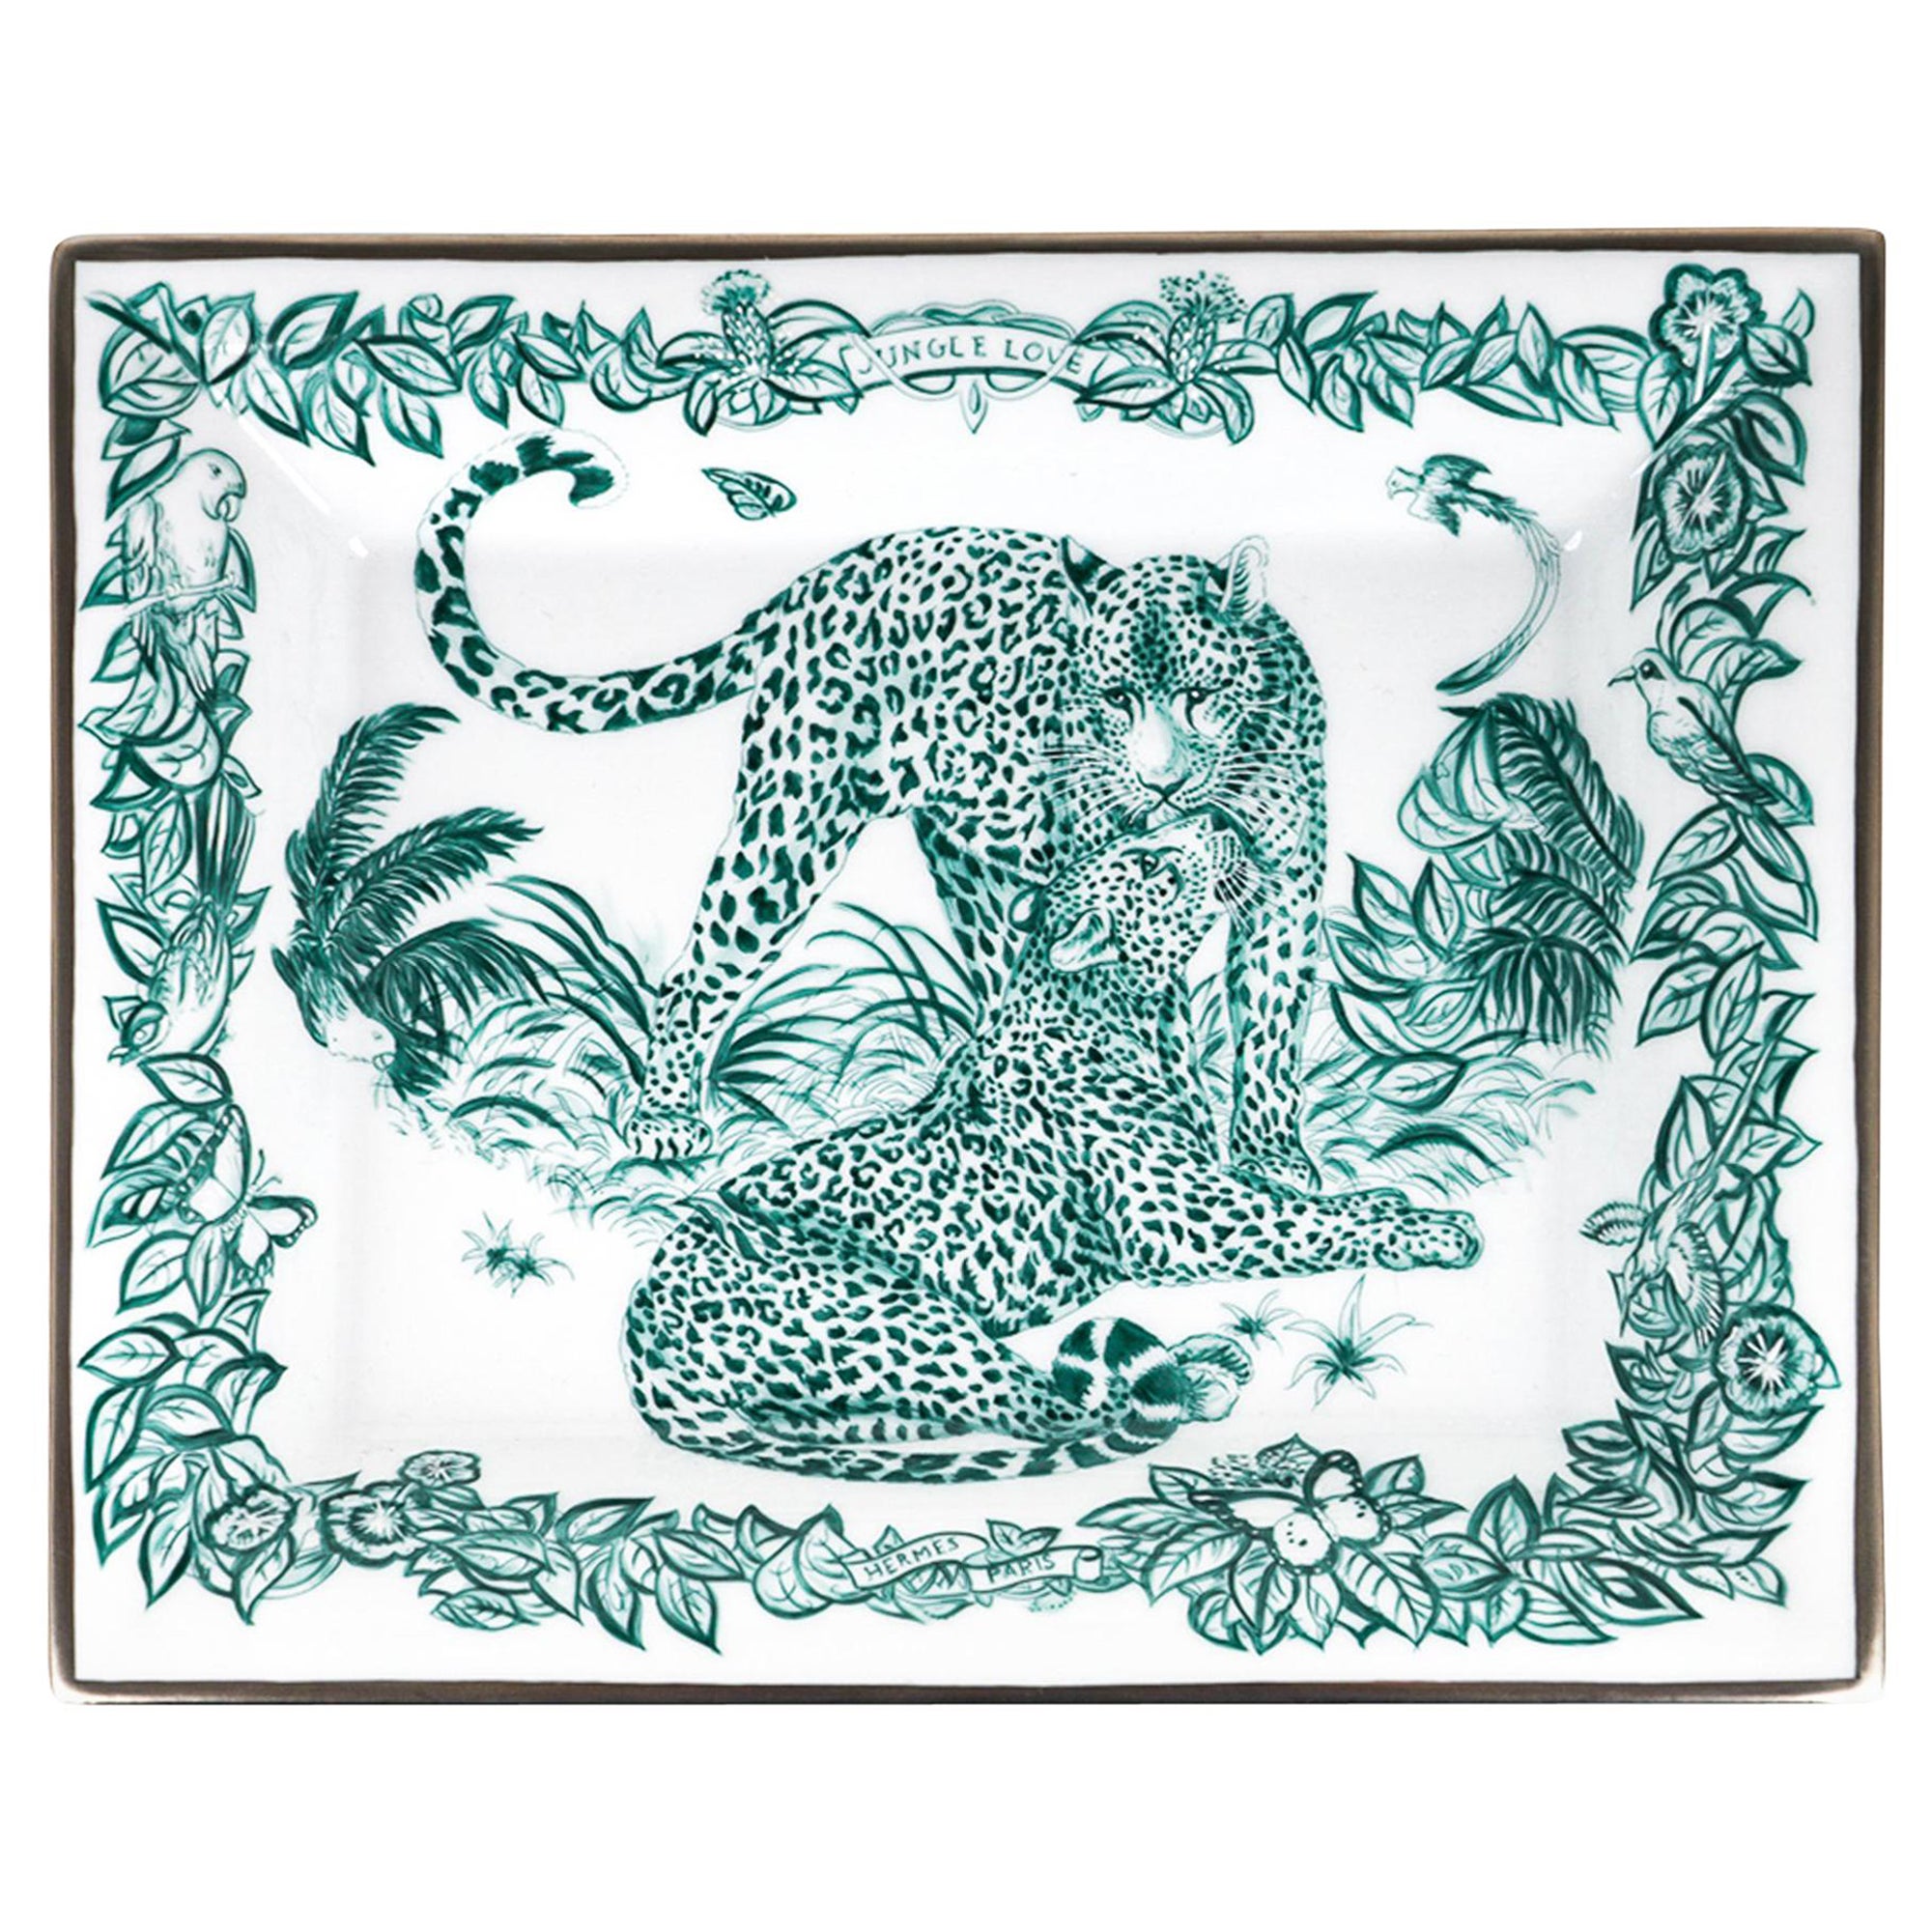 Hermes Tray Jungle Love Emerald Limoges Porcelain New w/ Box For Sale